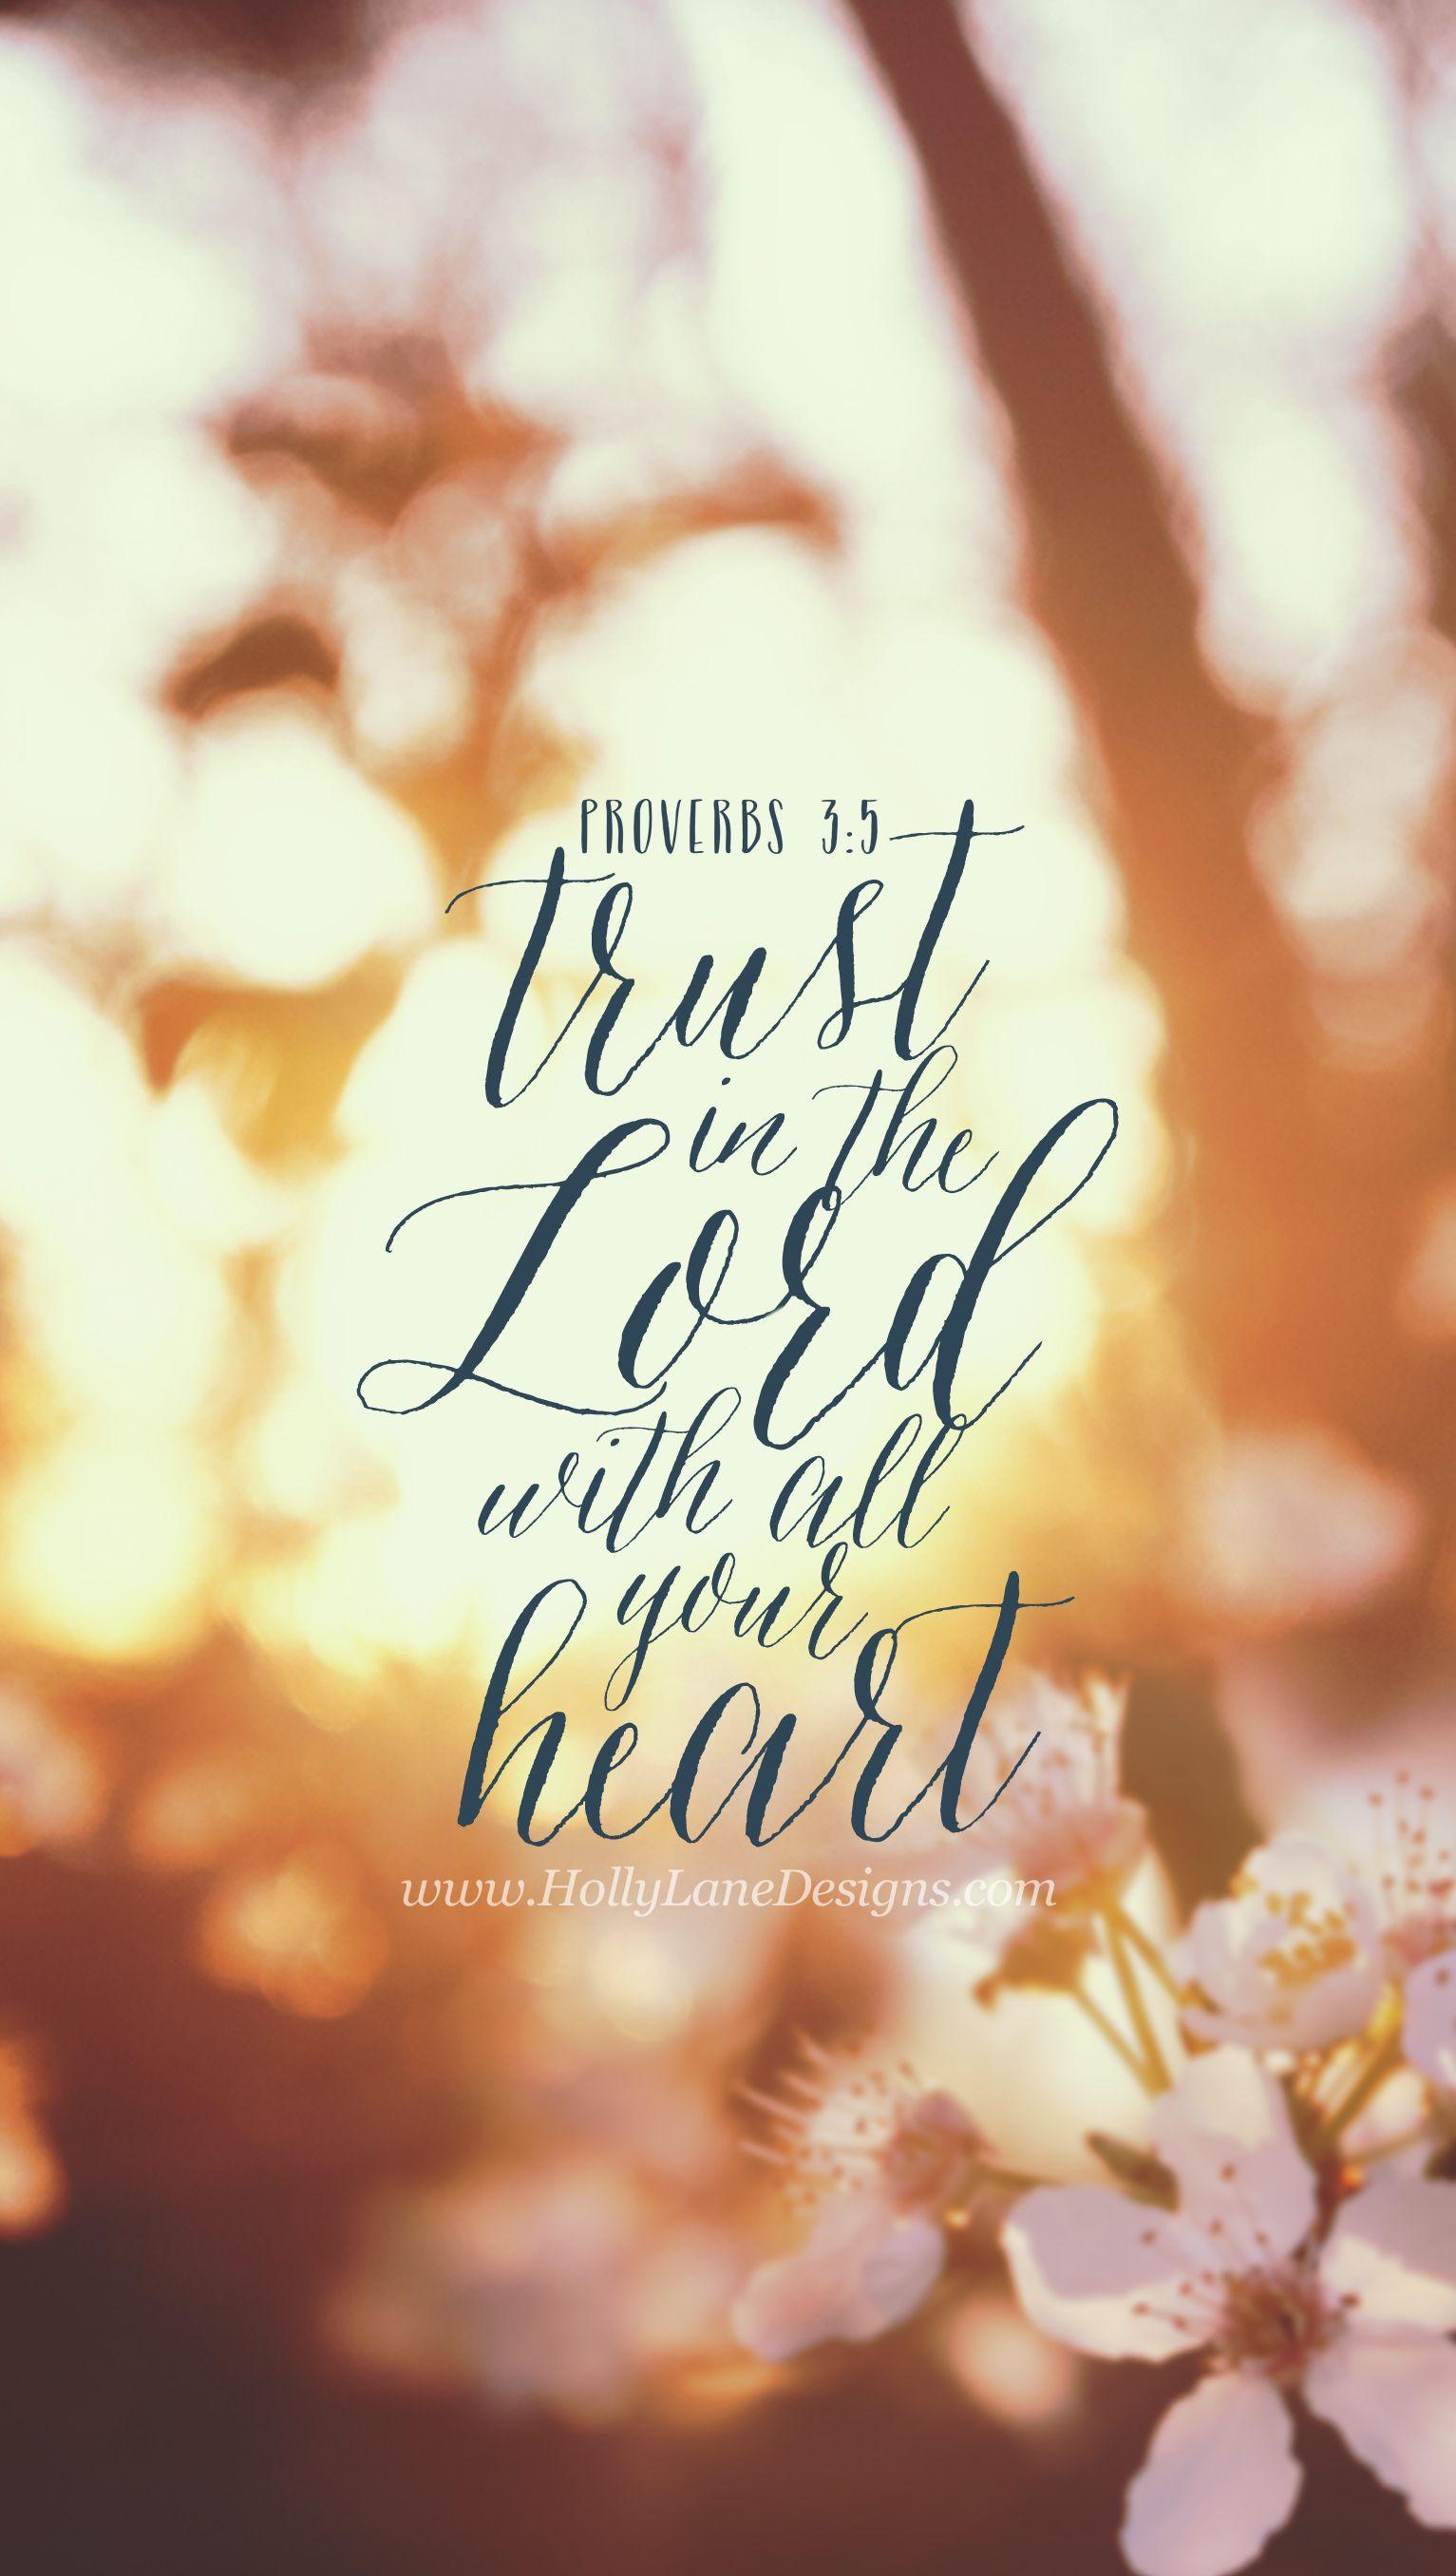 Proverbs 35 Bibleverse wallpaper  Trust in the Lord with all your heart   ActiveChristianity